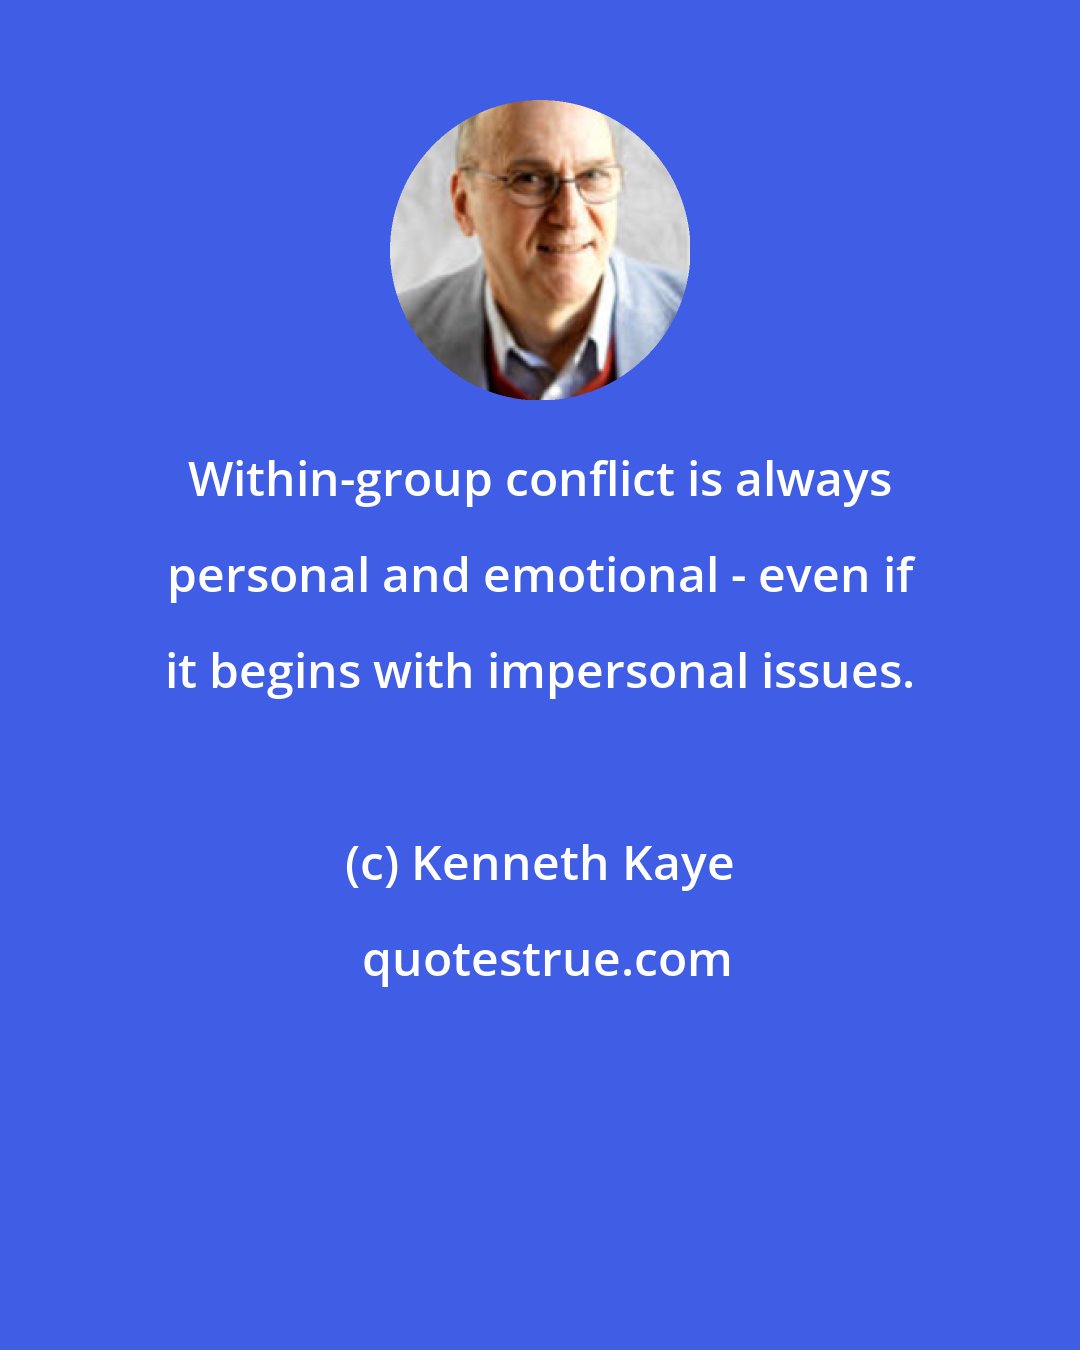 Kenneth Kaye: Within-group conflict is always personal and emotional - even if it begins with impersonal issues.